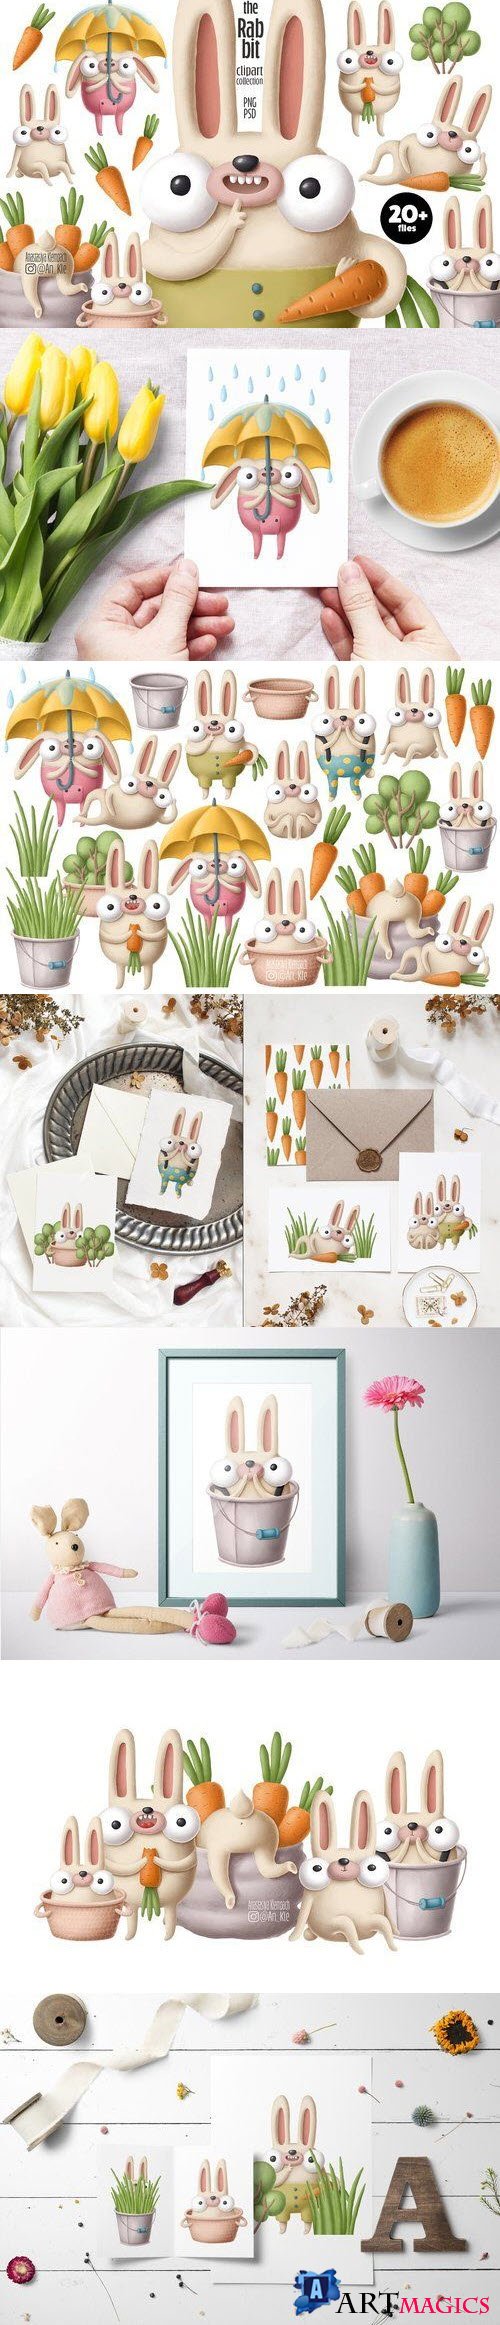 Rabbit clipart collection - 4425958